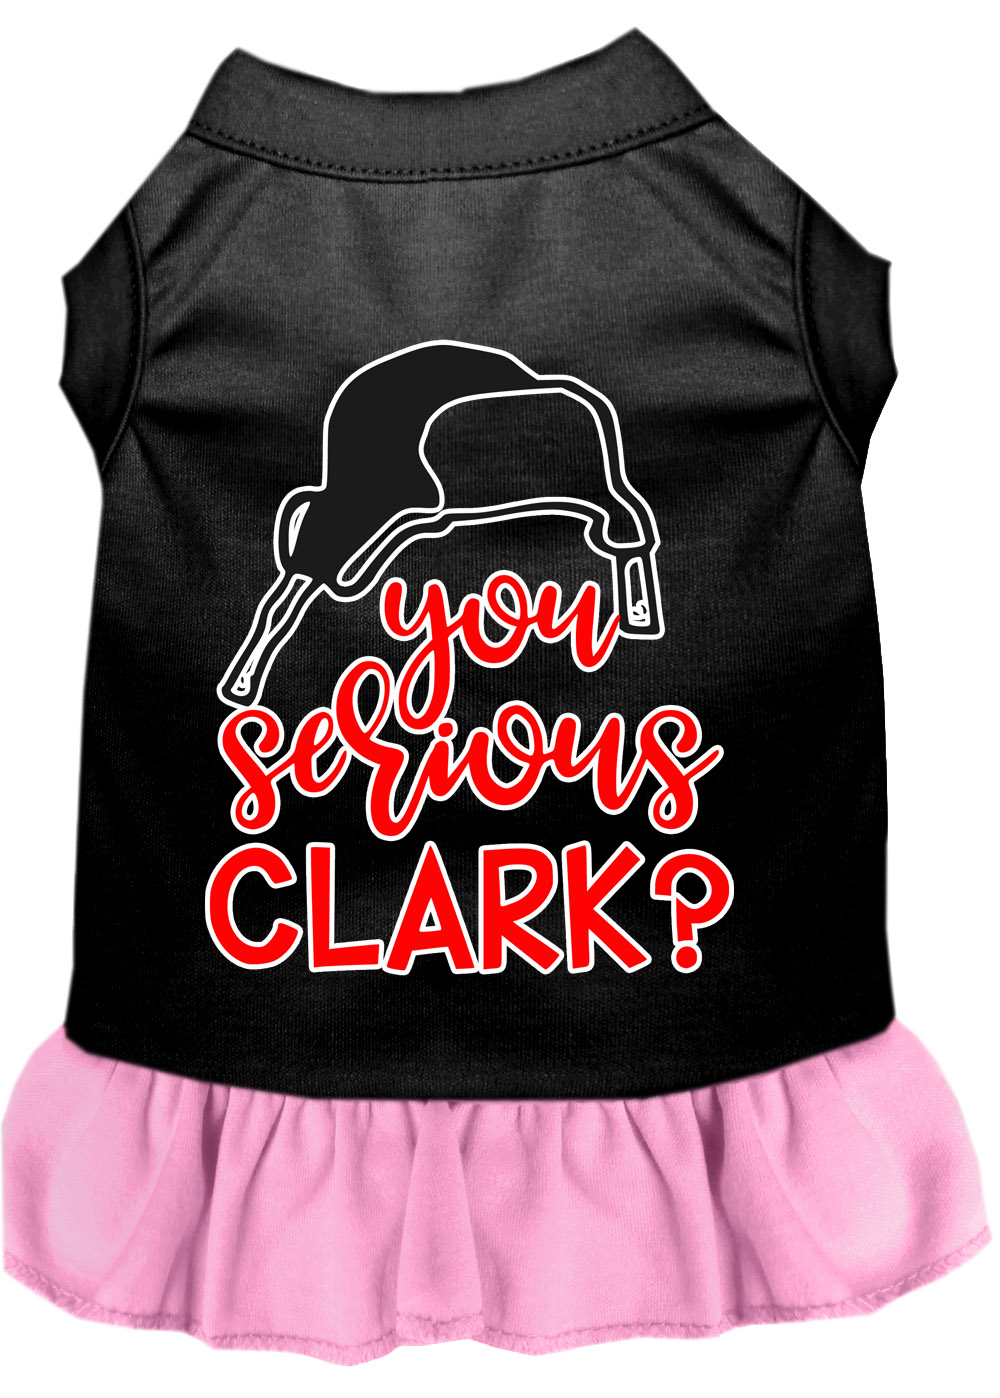 You Serious Clark? Screen Print Dog Dress Black with Light Pink Med